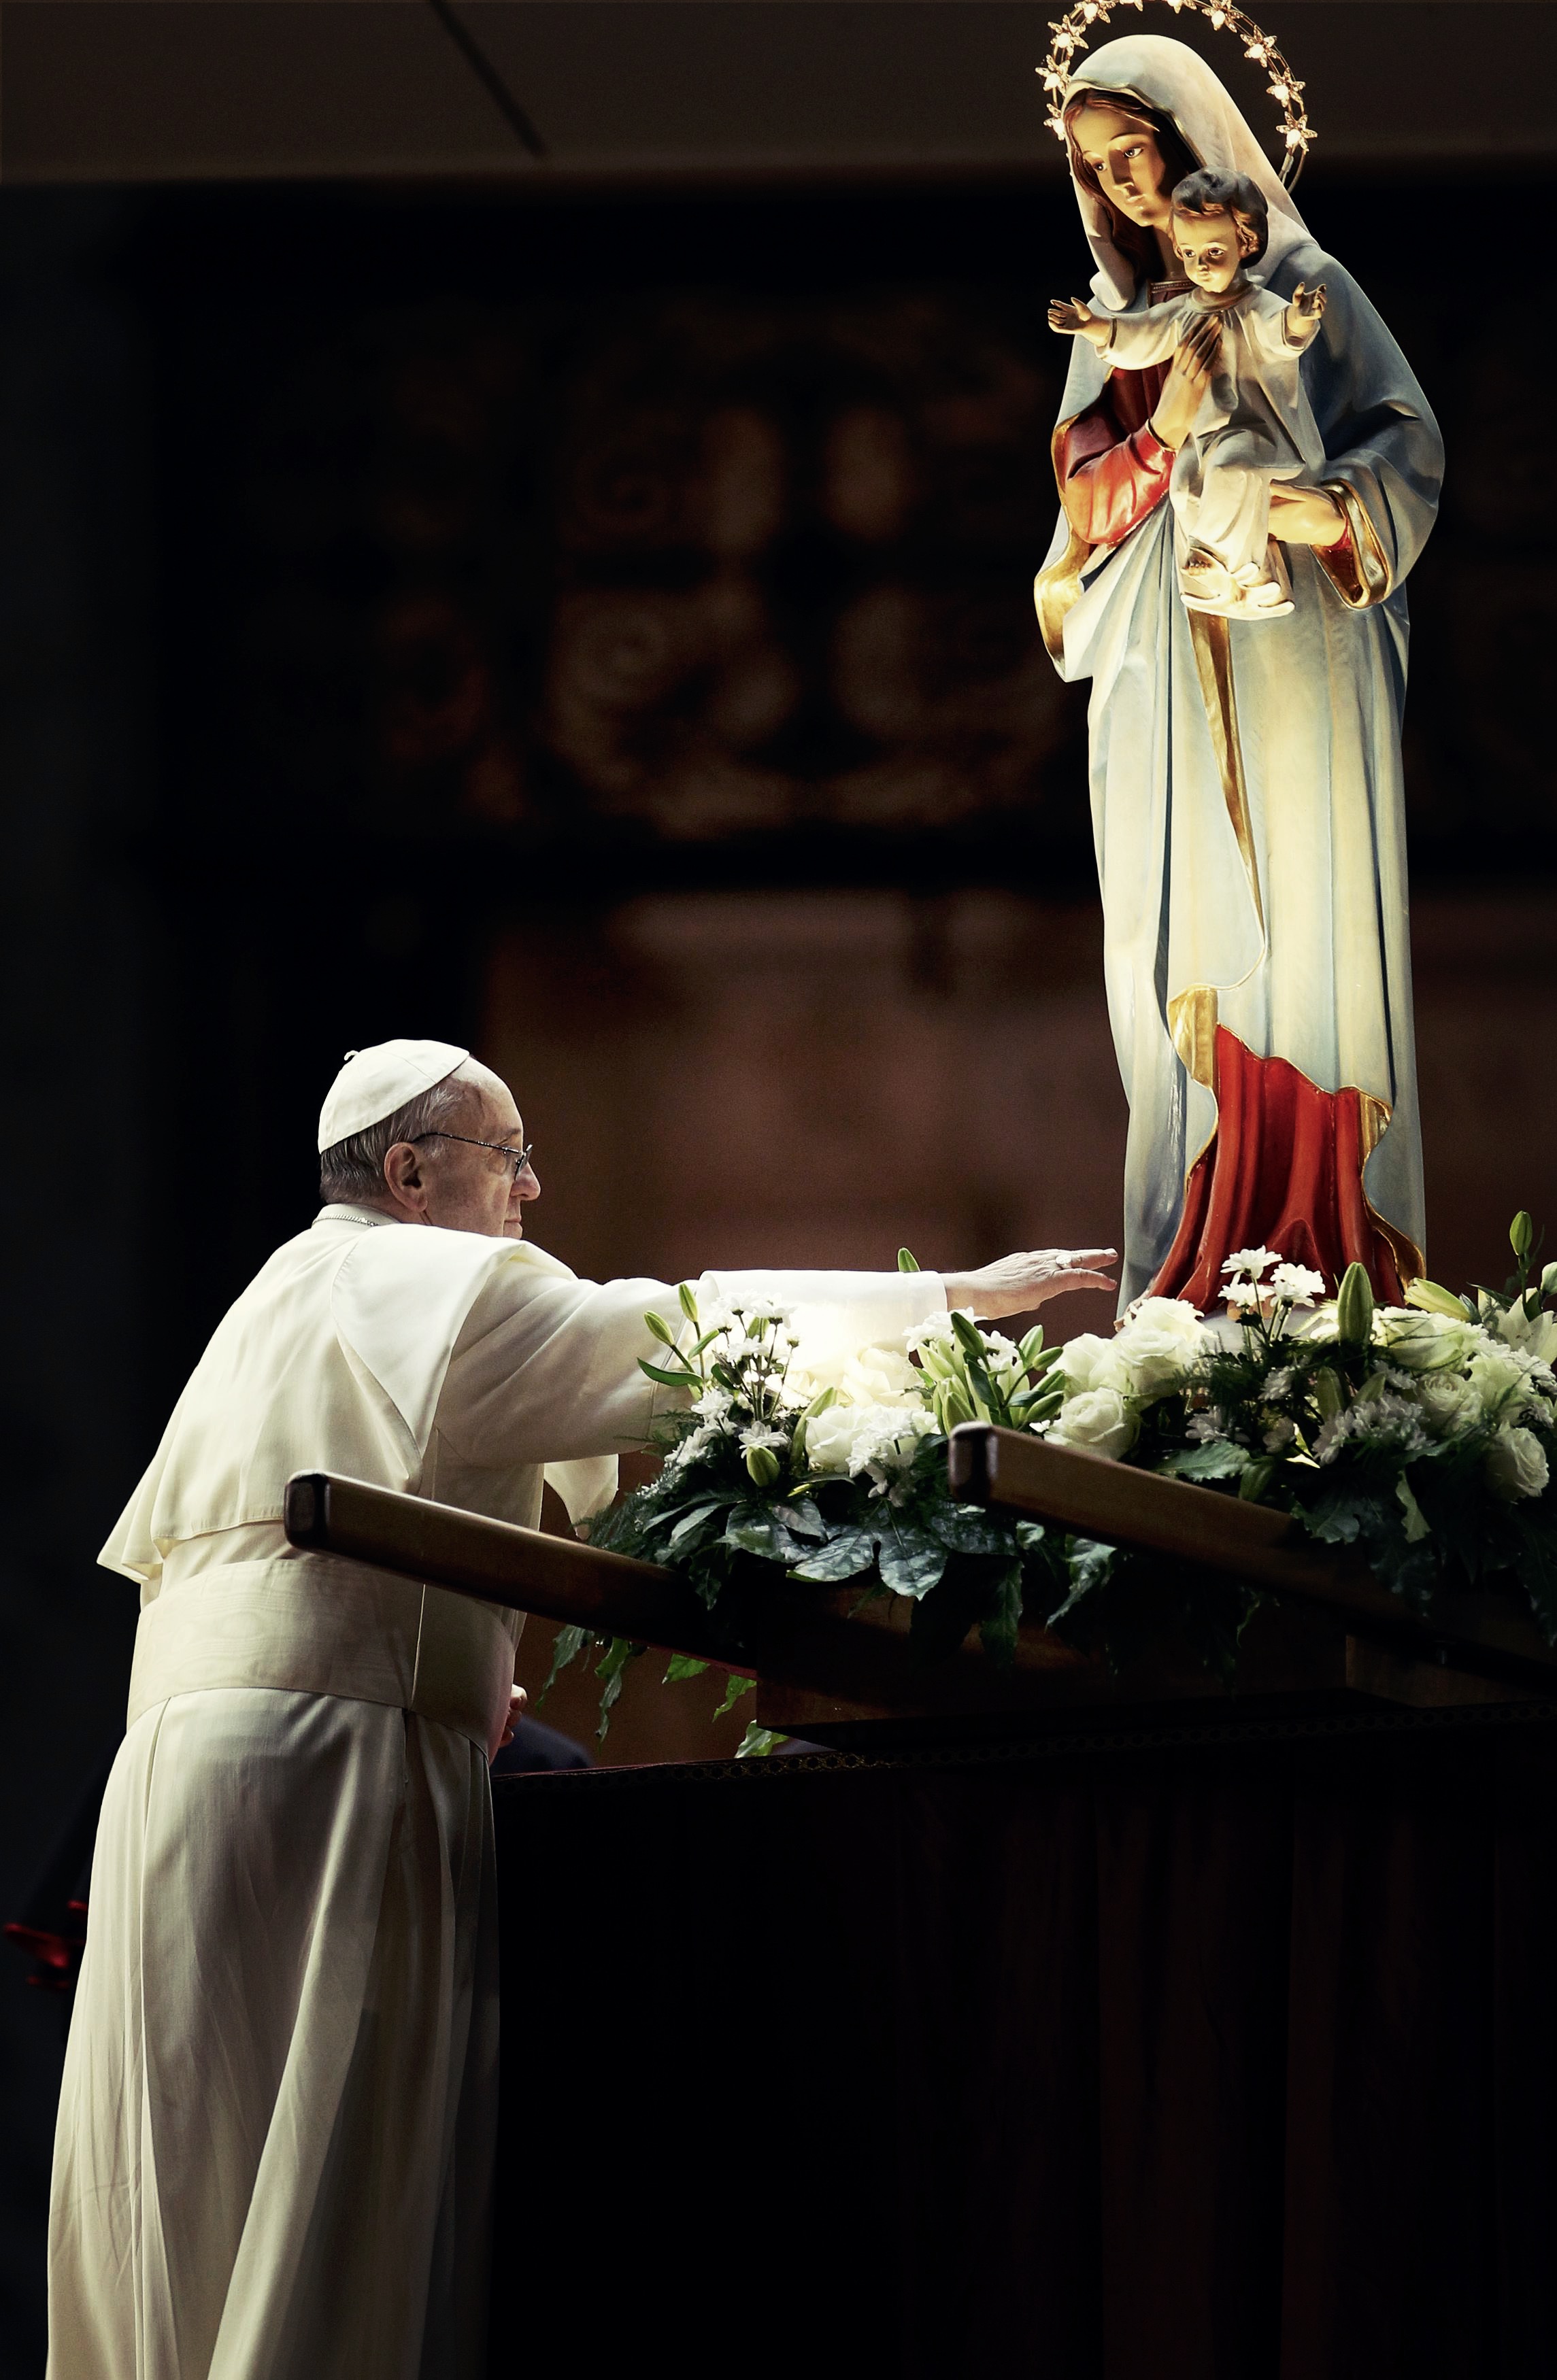 Pope Francis touches a Virgin Mary statue during a ceremony to mark the end of May at St. Peter's Square in the Vatican May 31, 2013.       REUTERS/Giampiero Sposito (VATICAN - Tags: RELIGION)